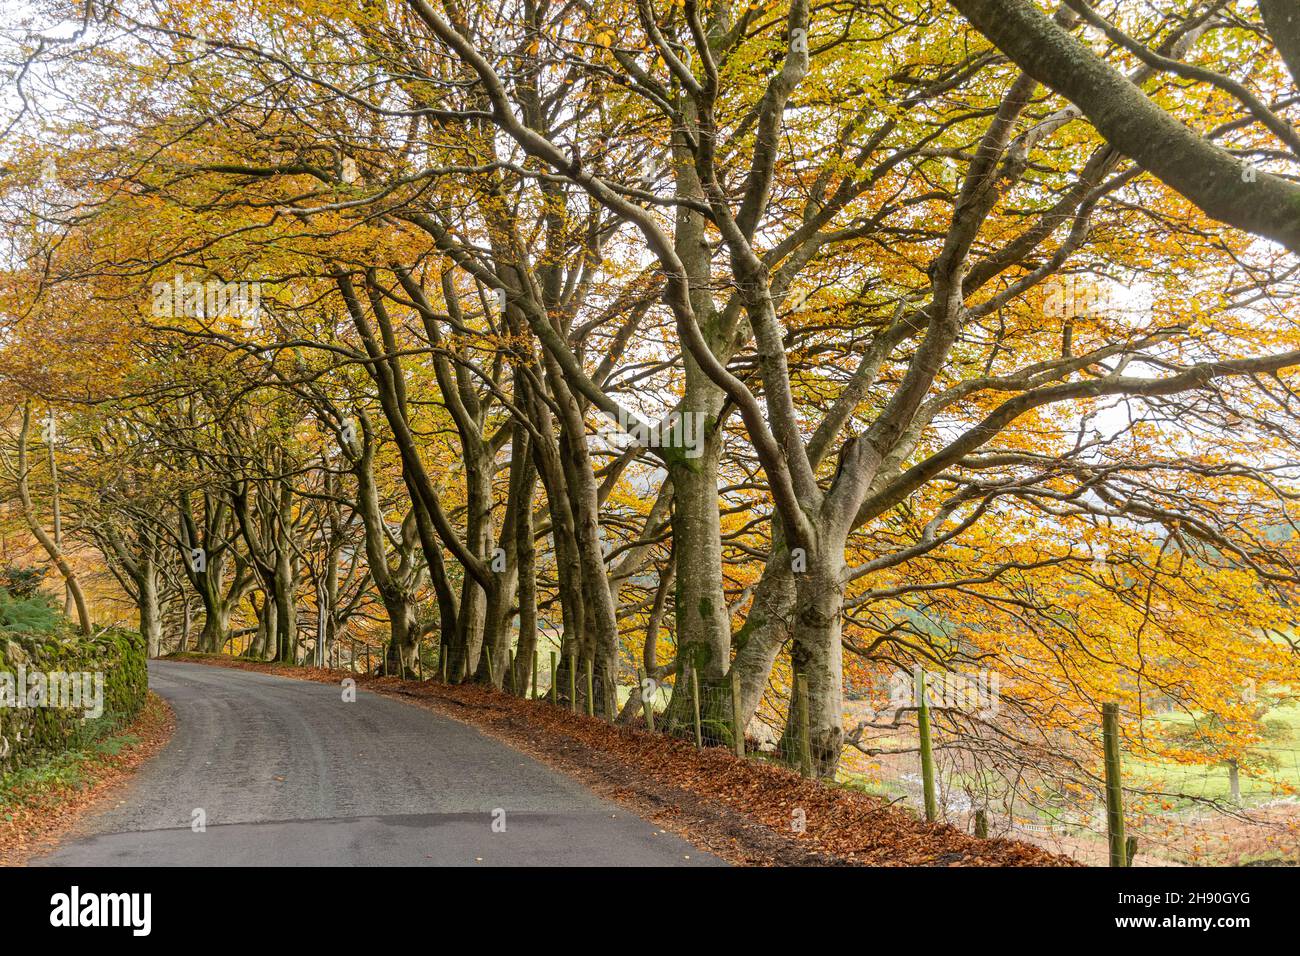 Row of golden beech trees lining the road along the Whinlatter Pass in the Lake District National Park during autumn or November, Cumbria, England, UK Stock Photo